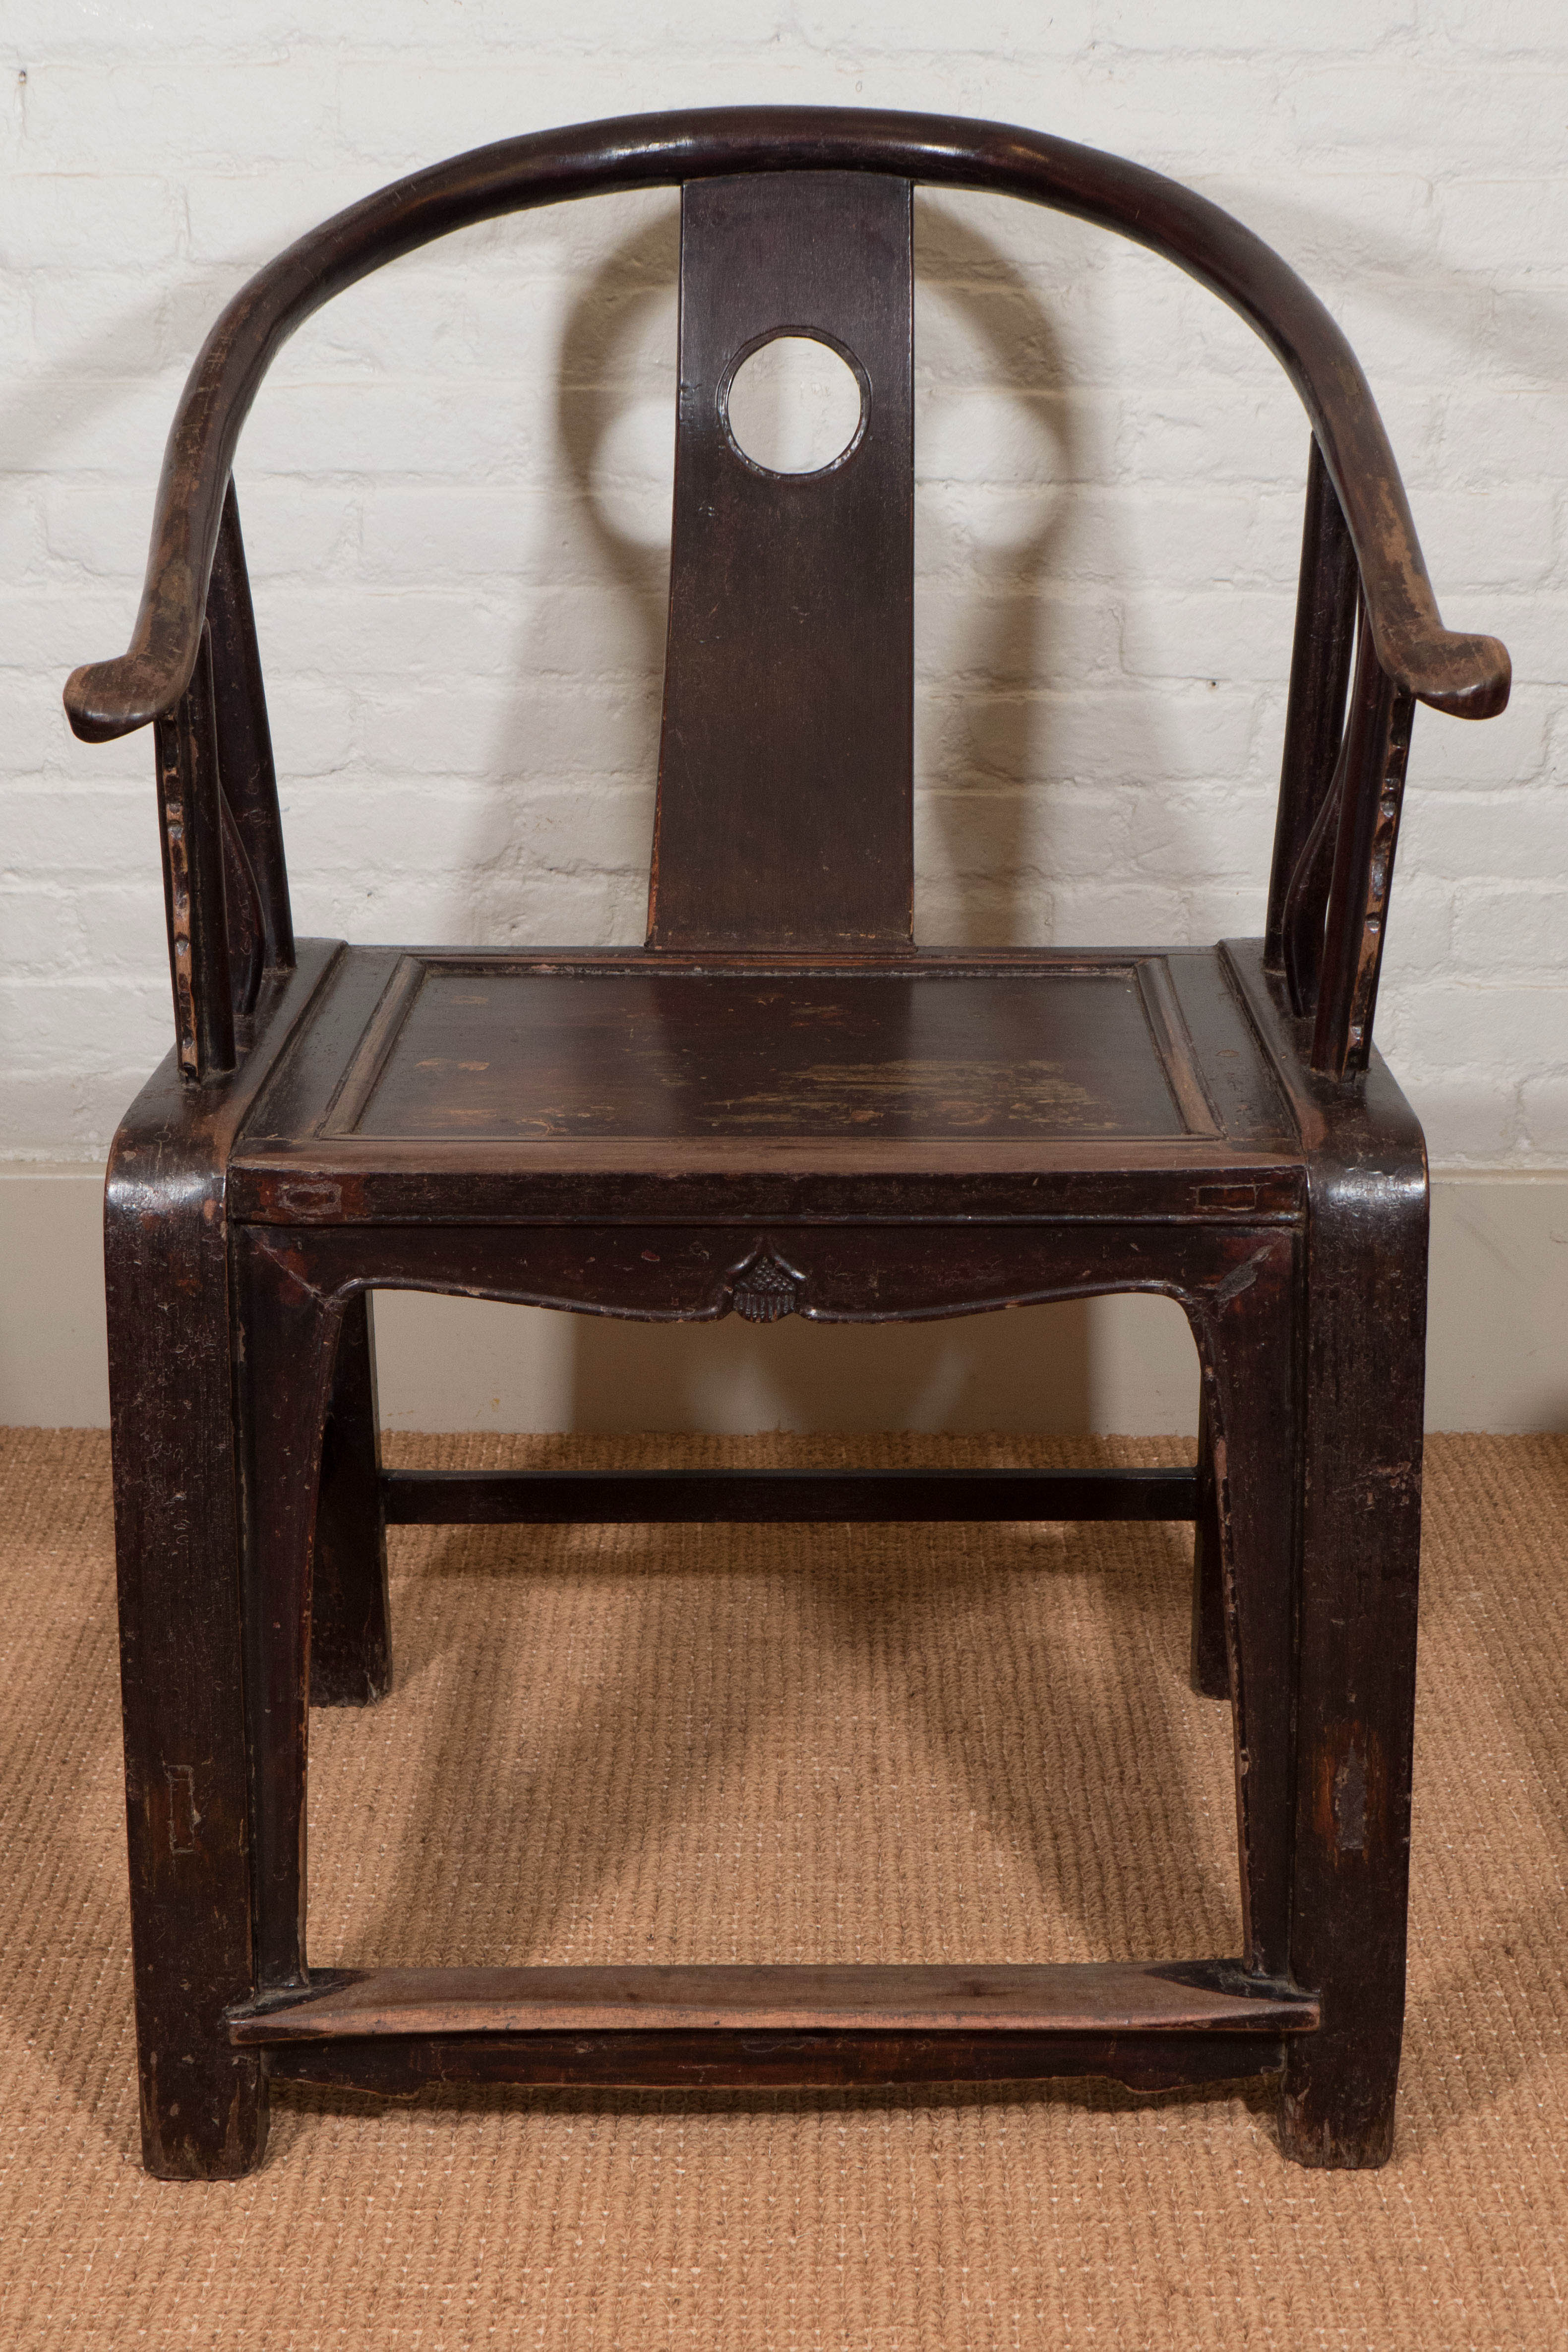 A Pair of 19th C. Chinese Horseshoe Chairs For Sale